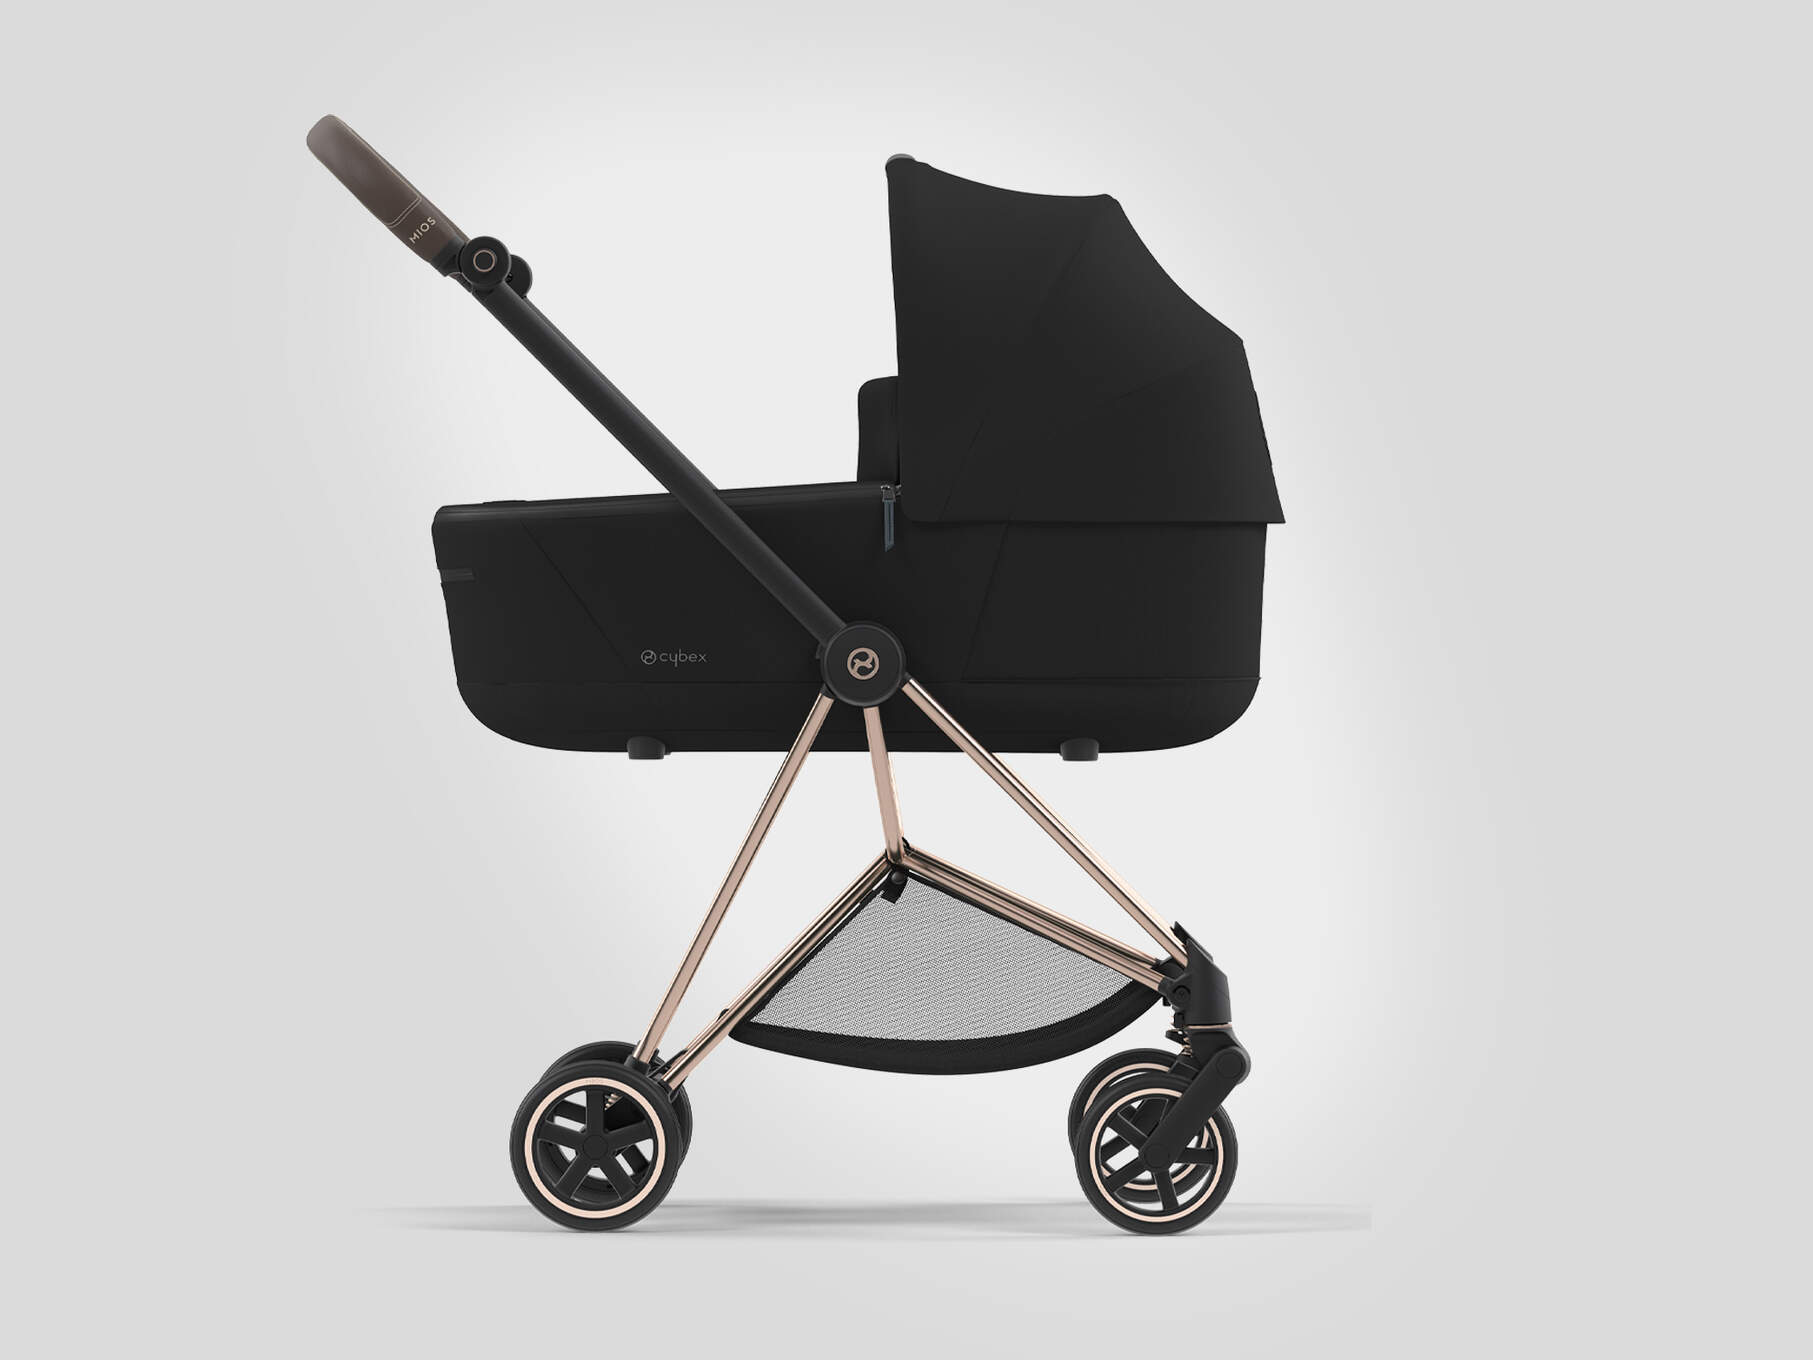 CYBEX Platinum Pushchair Mios Lux Carry Cot shown on Mios Frame 